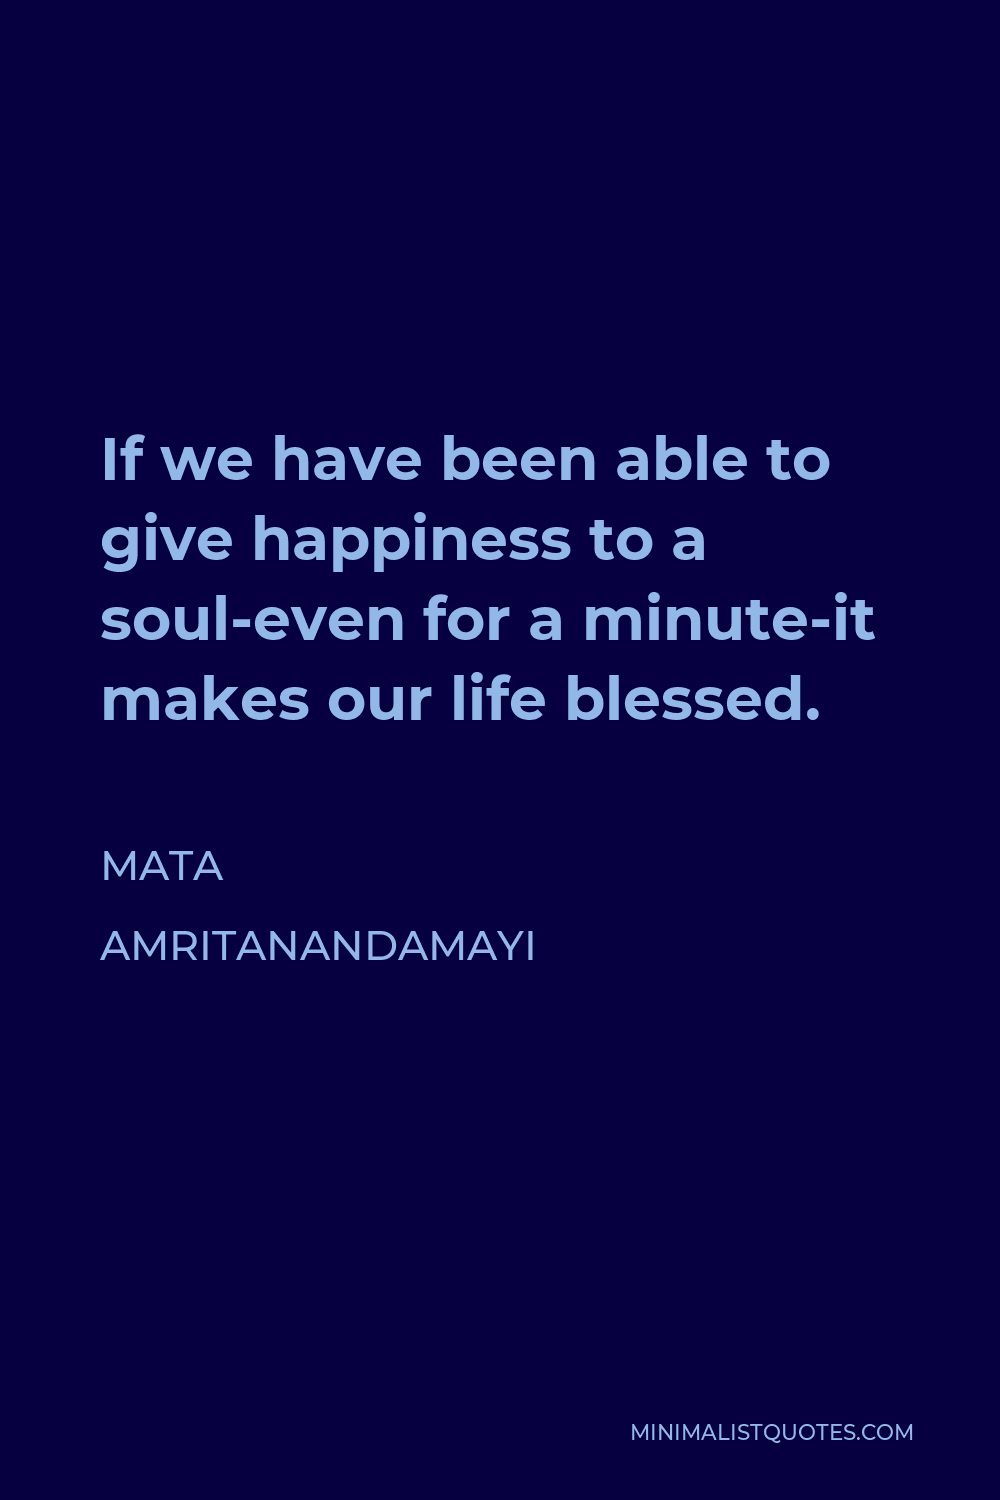 Mata Amritanandamayi Quote - If we have been able to give happiness to a soul-even for a minute-it makes our life blessed.